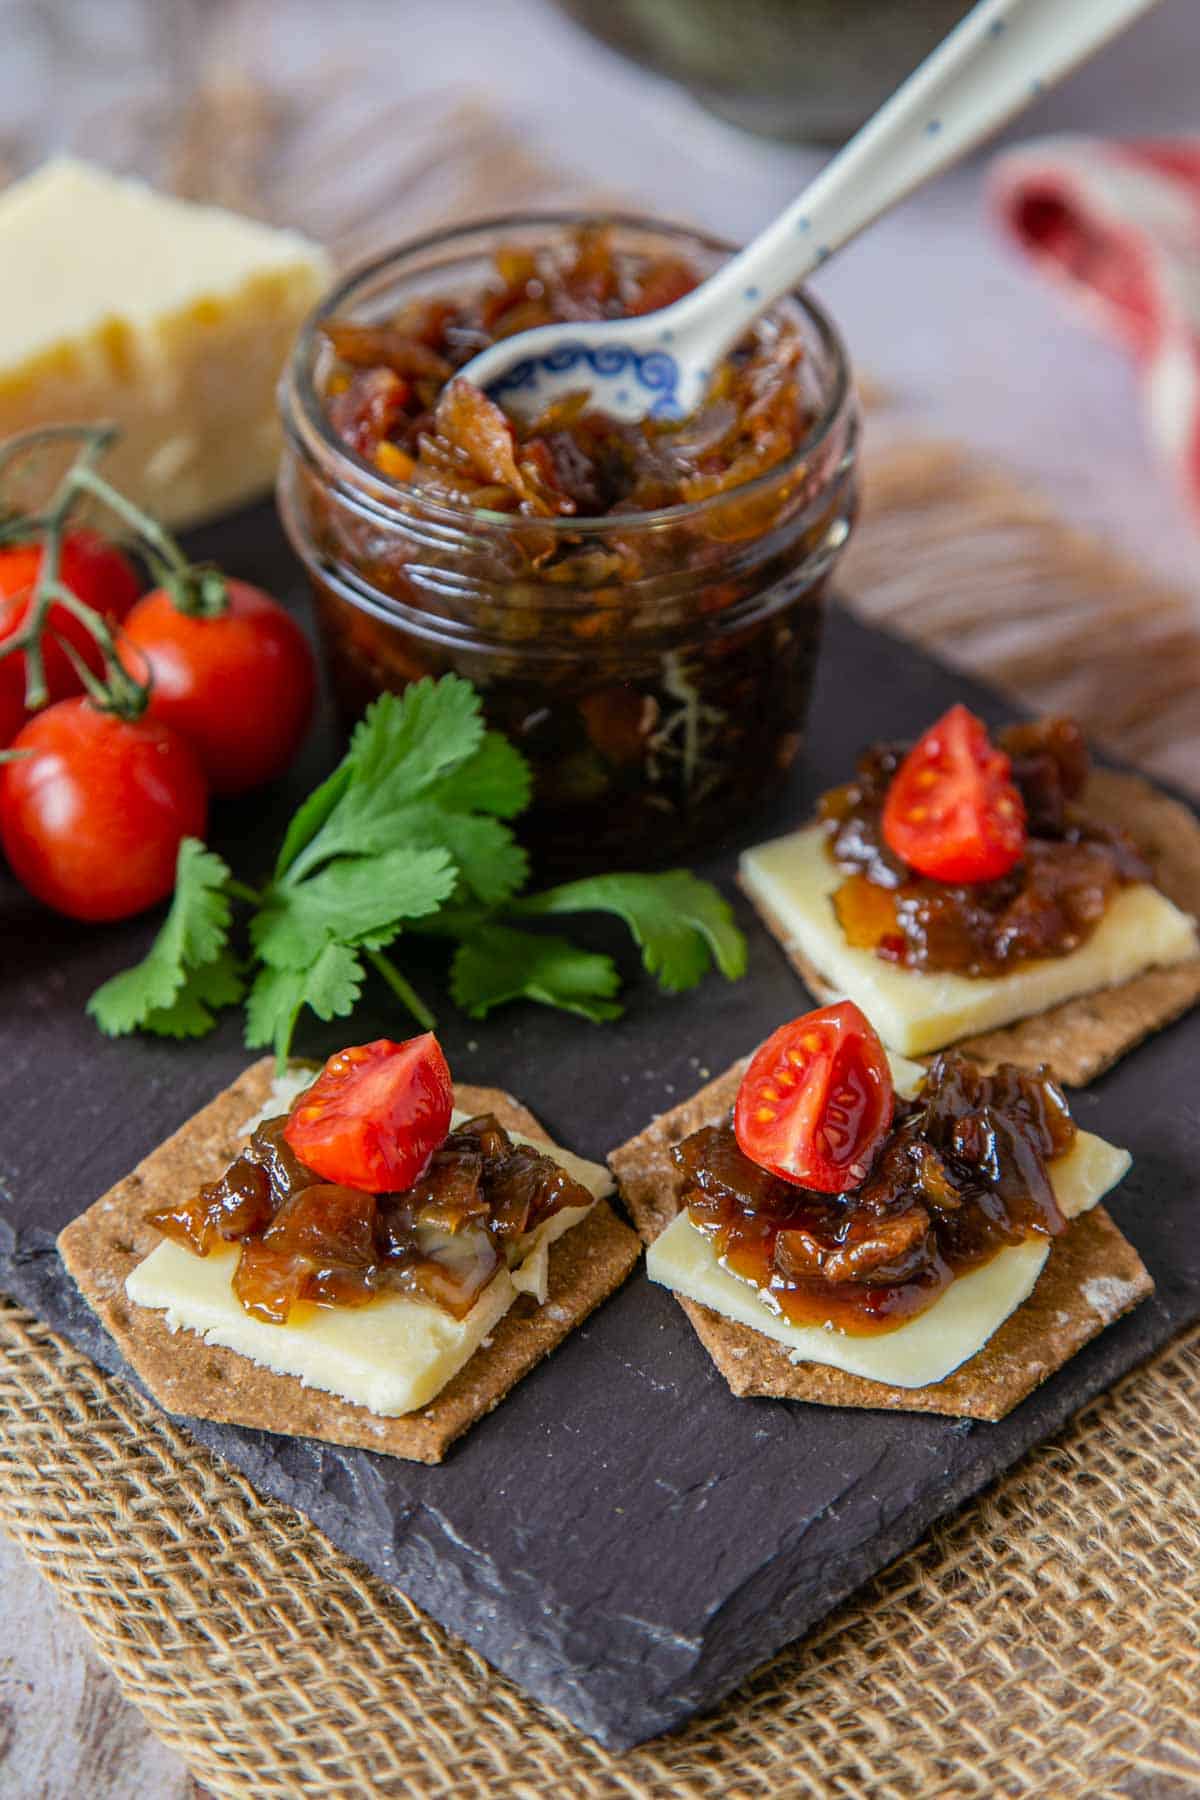 Bourbon bacon jam in a jar and topping cheese and crackers along with cherry tomatoes.